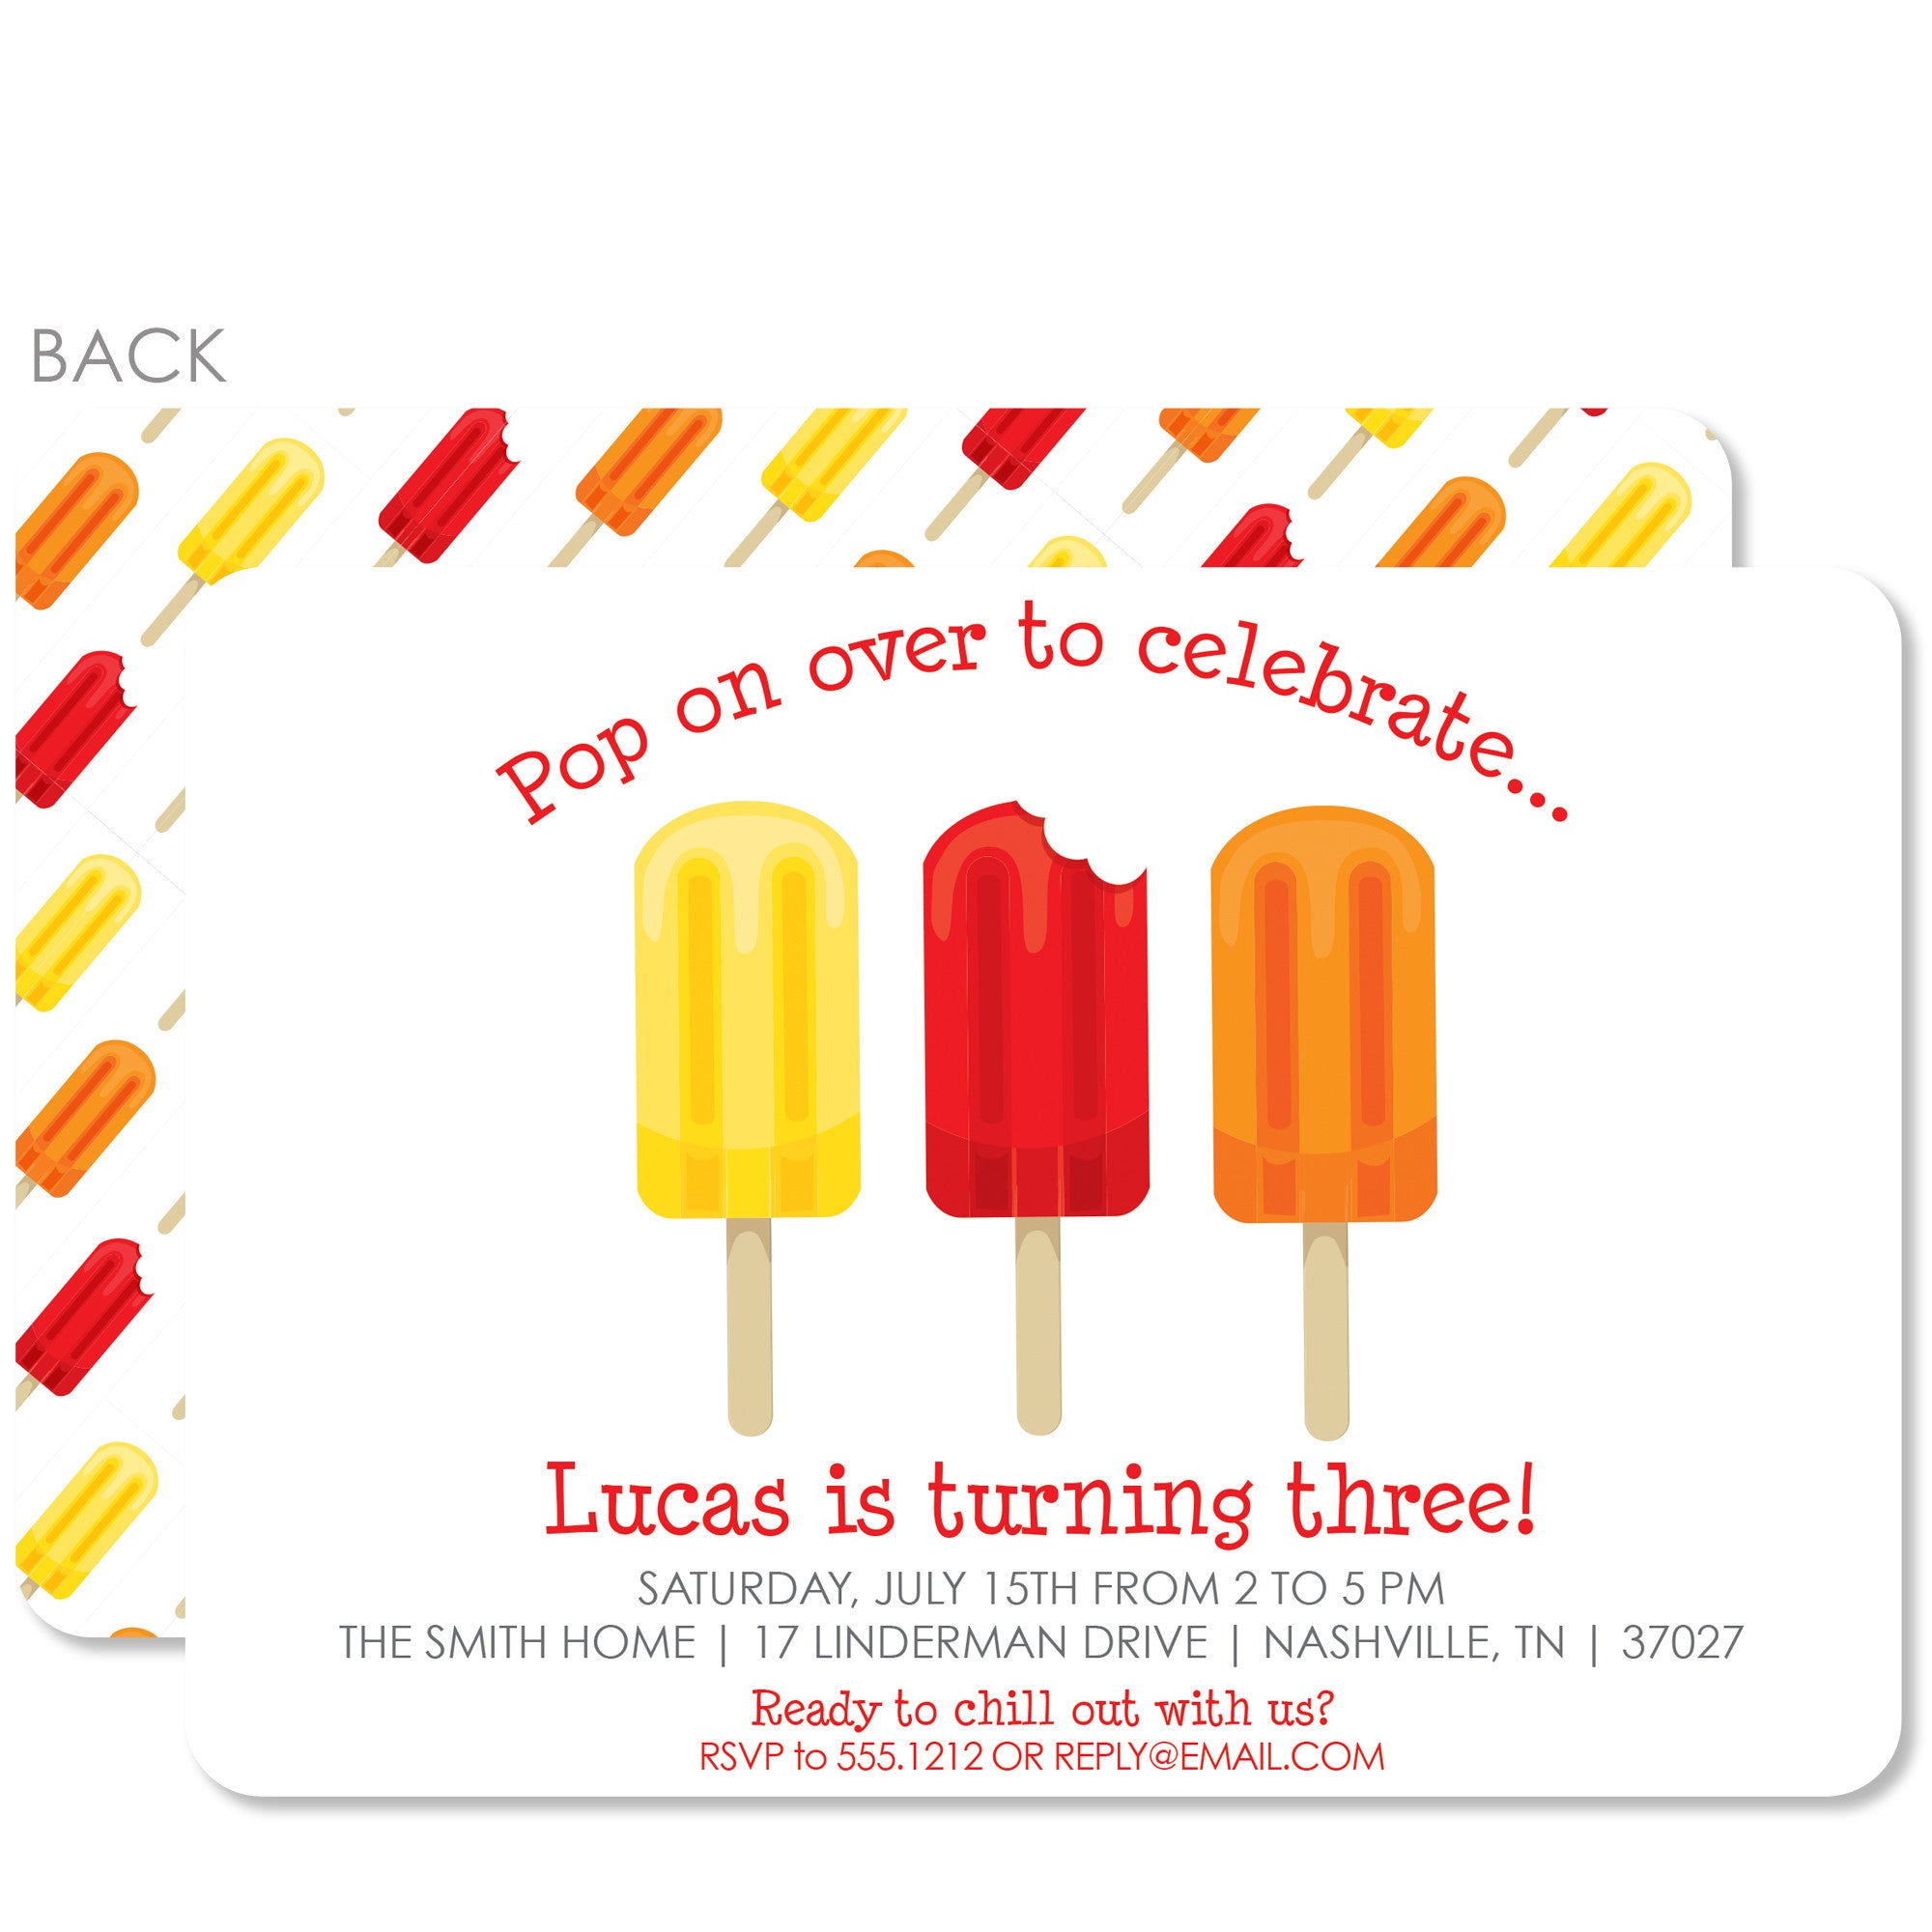 Popsicle Party Birthday Invitation | Pipsy.com | Red